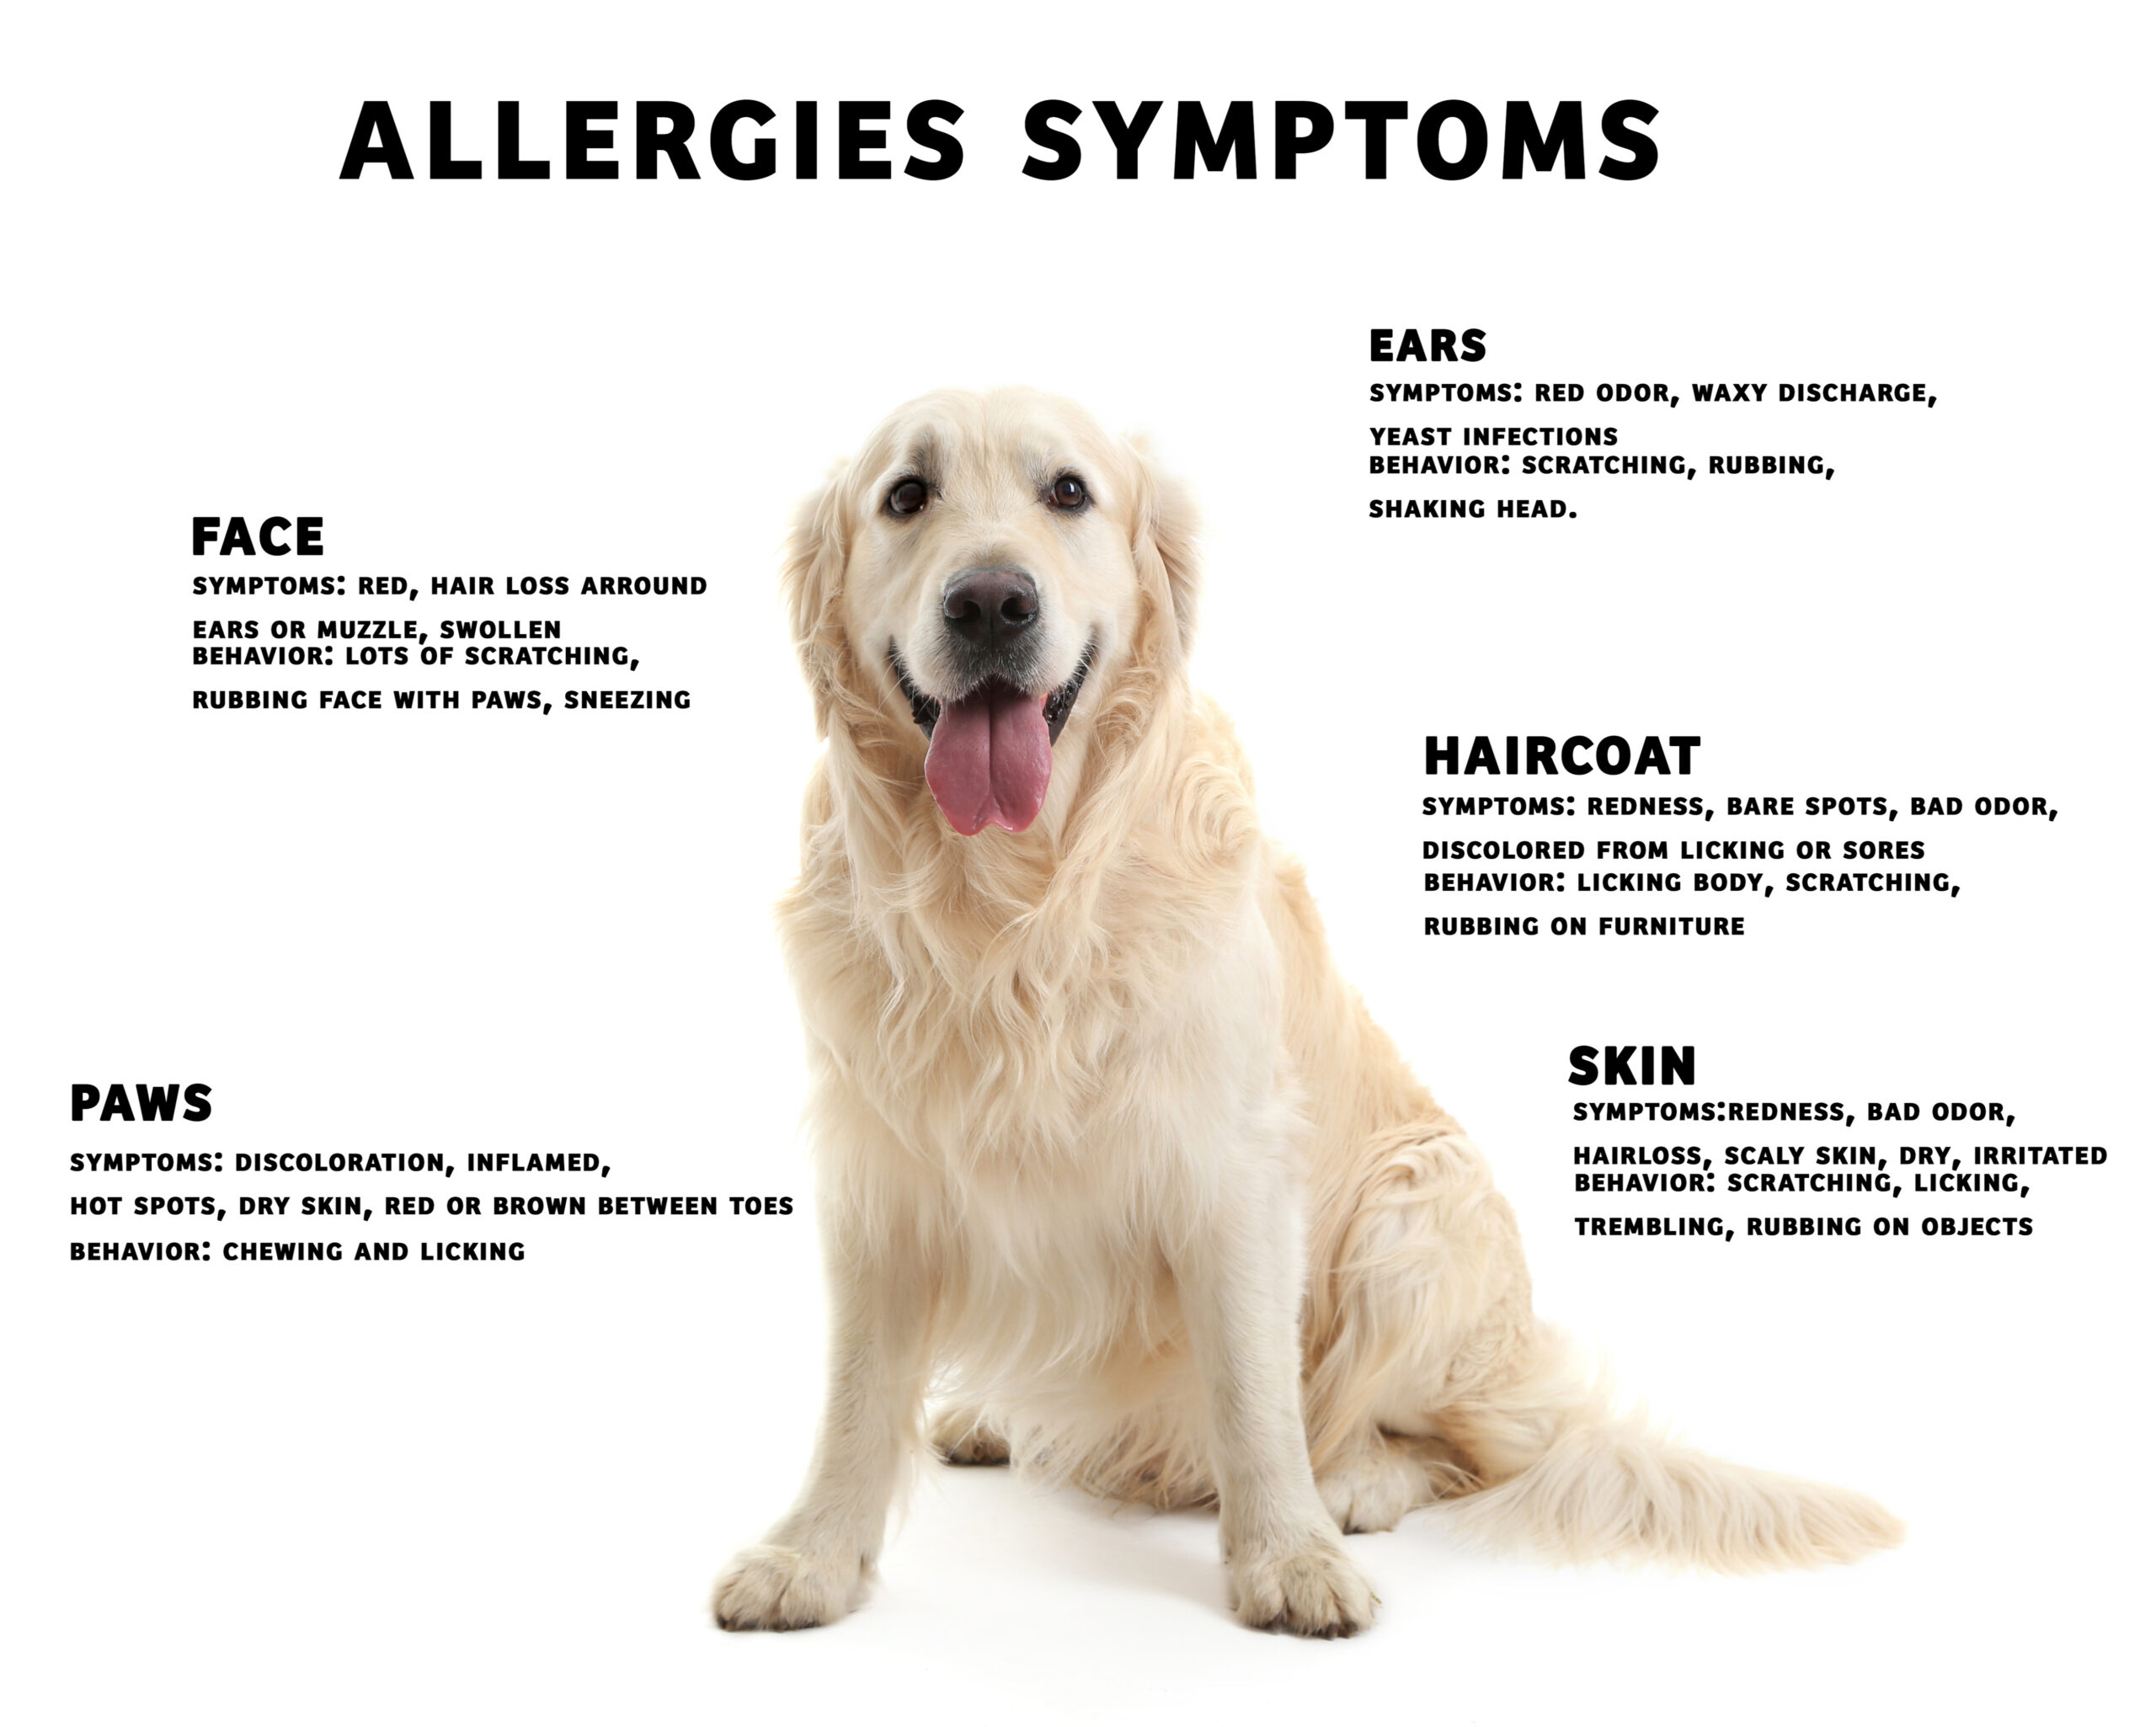 Does Your Dog Have Seasonal Allergies - by Cherie Mallory - Houston's  Premier Dog Daycare, Boarding, Training & Grooming FacilityHouston's  Premier Dog Daycare, Boarding, Training & Grooming Facility